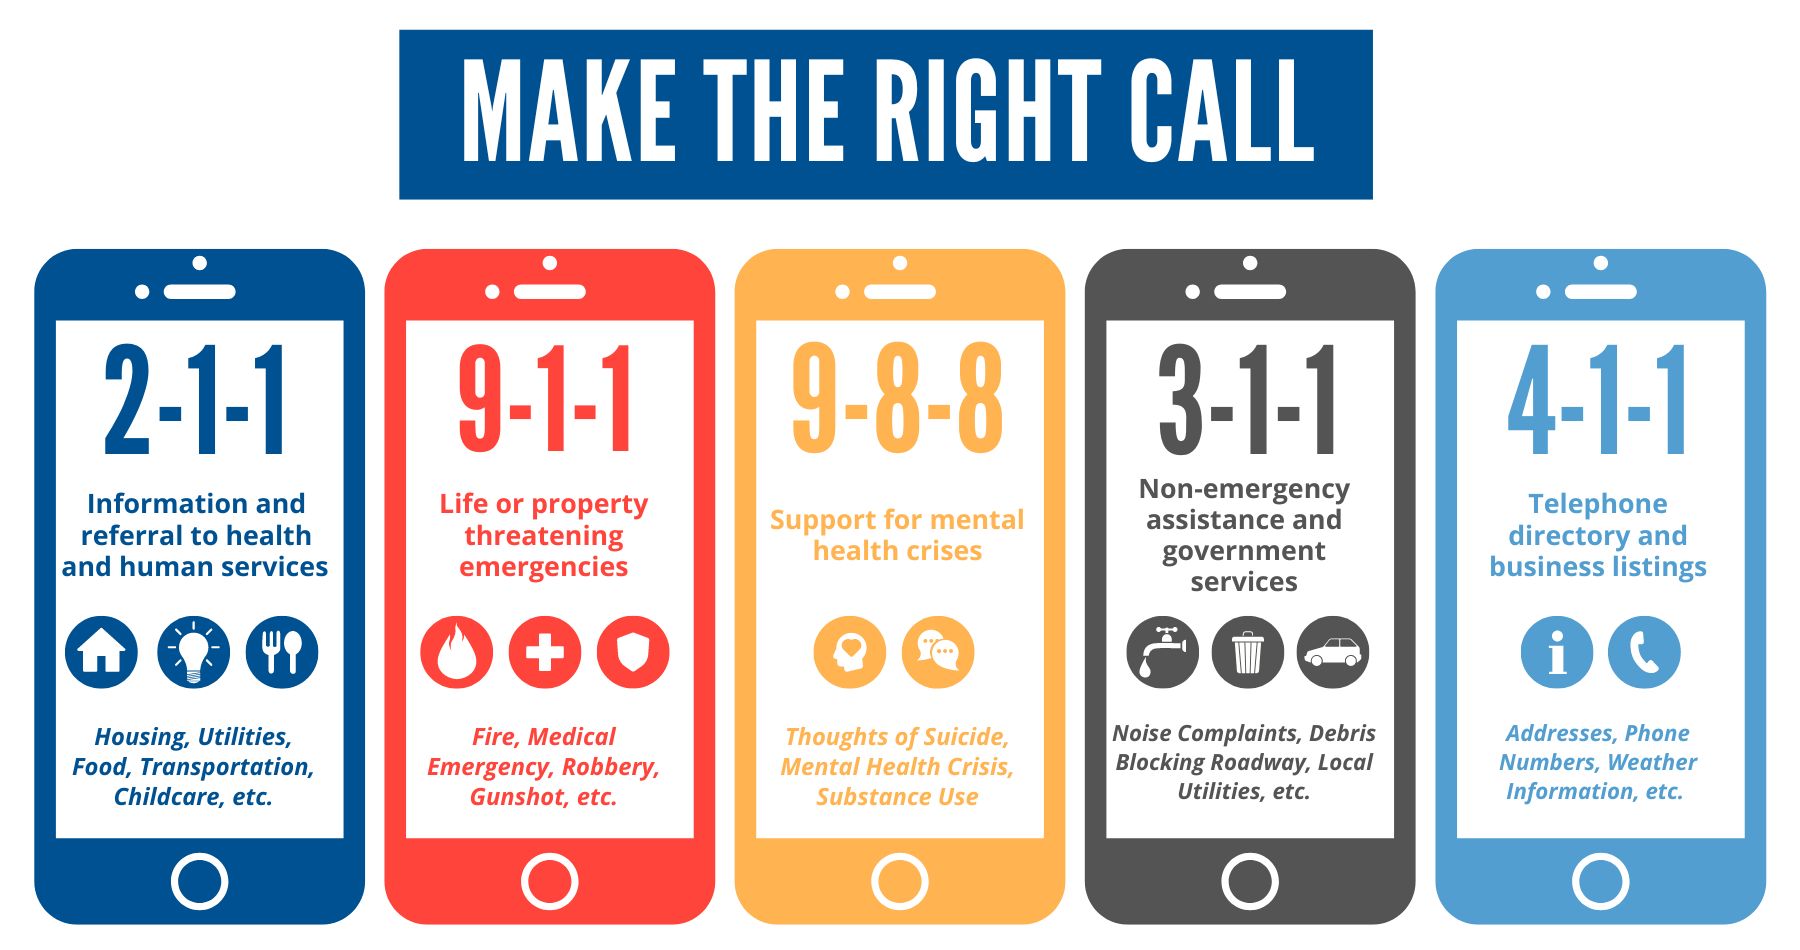 2-1-1 is information and referral to health and human services. 9-1-1 is life or property threatening emergencies. 9-8-8 is support for mental health crises. 3-1-1 is non-emergency assistance and government services. 4-1-1 is telephone directory or business listings. 